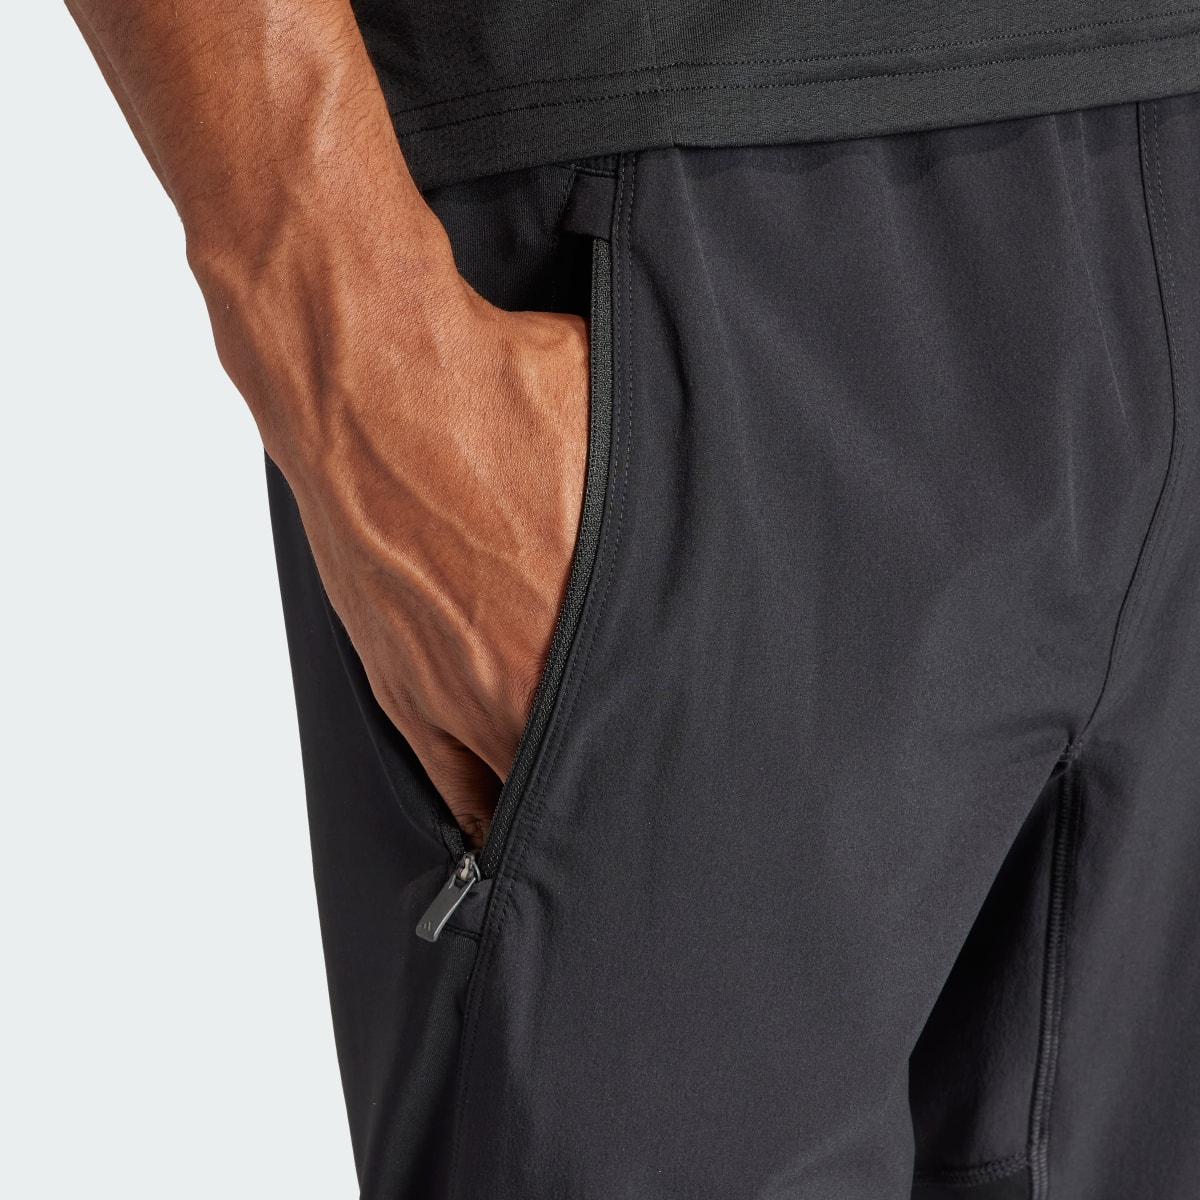 Adidas Designed for Training Workout Joggers. 4